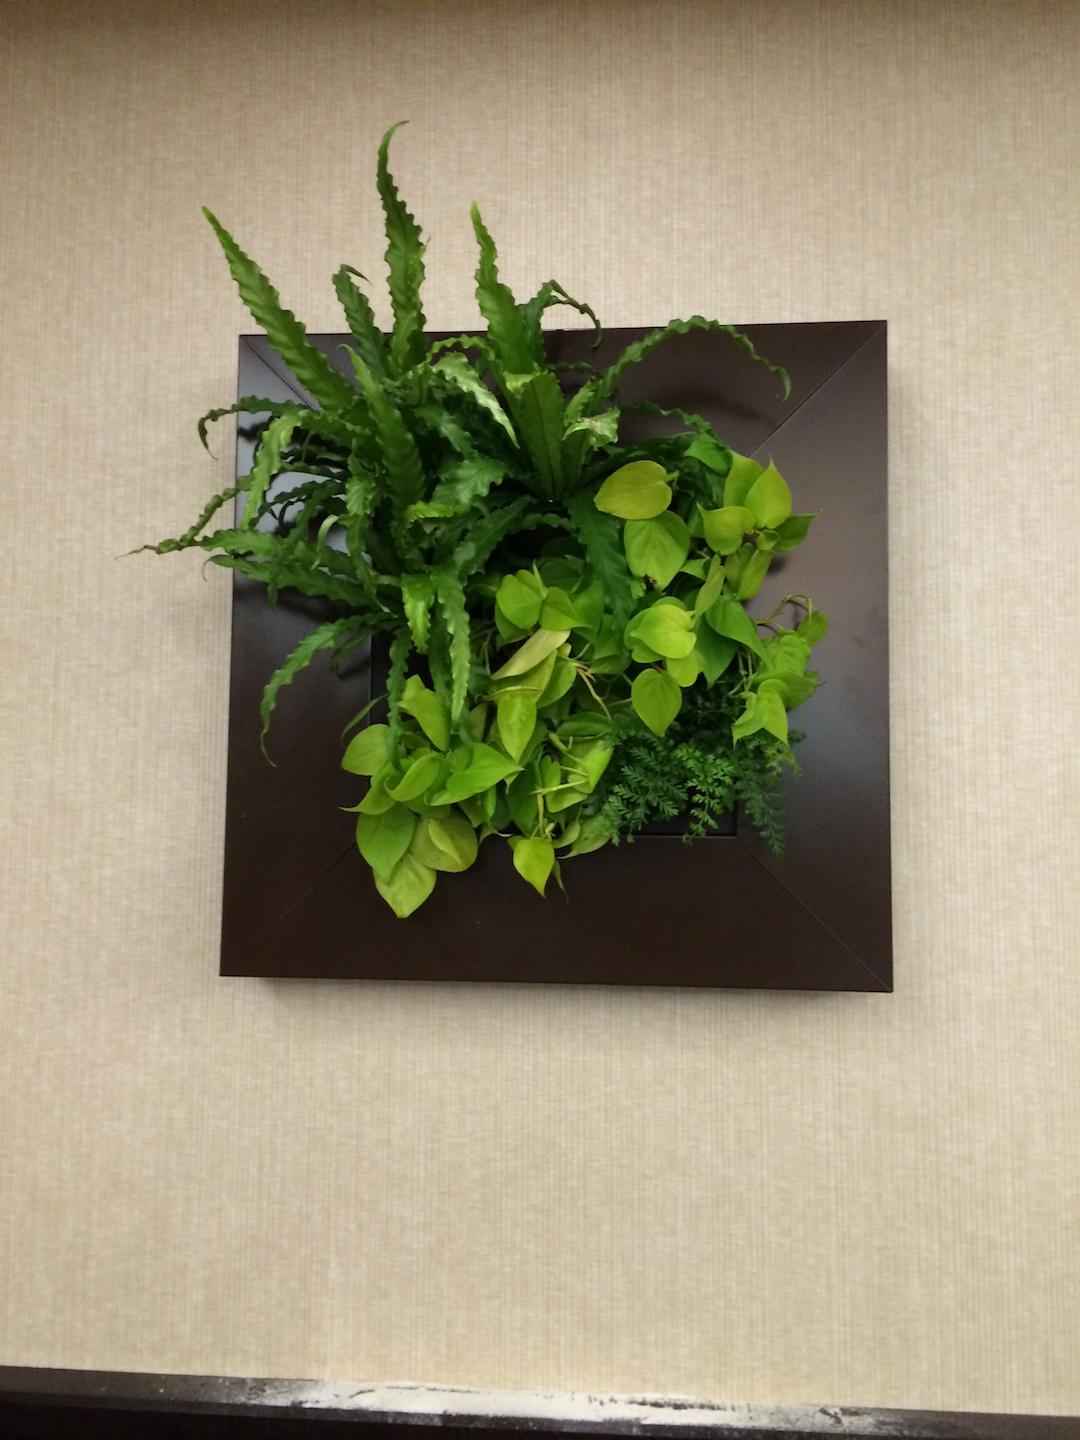 Living plant picture with live green plants